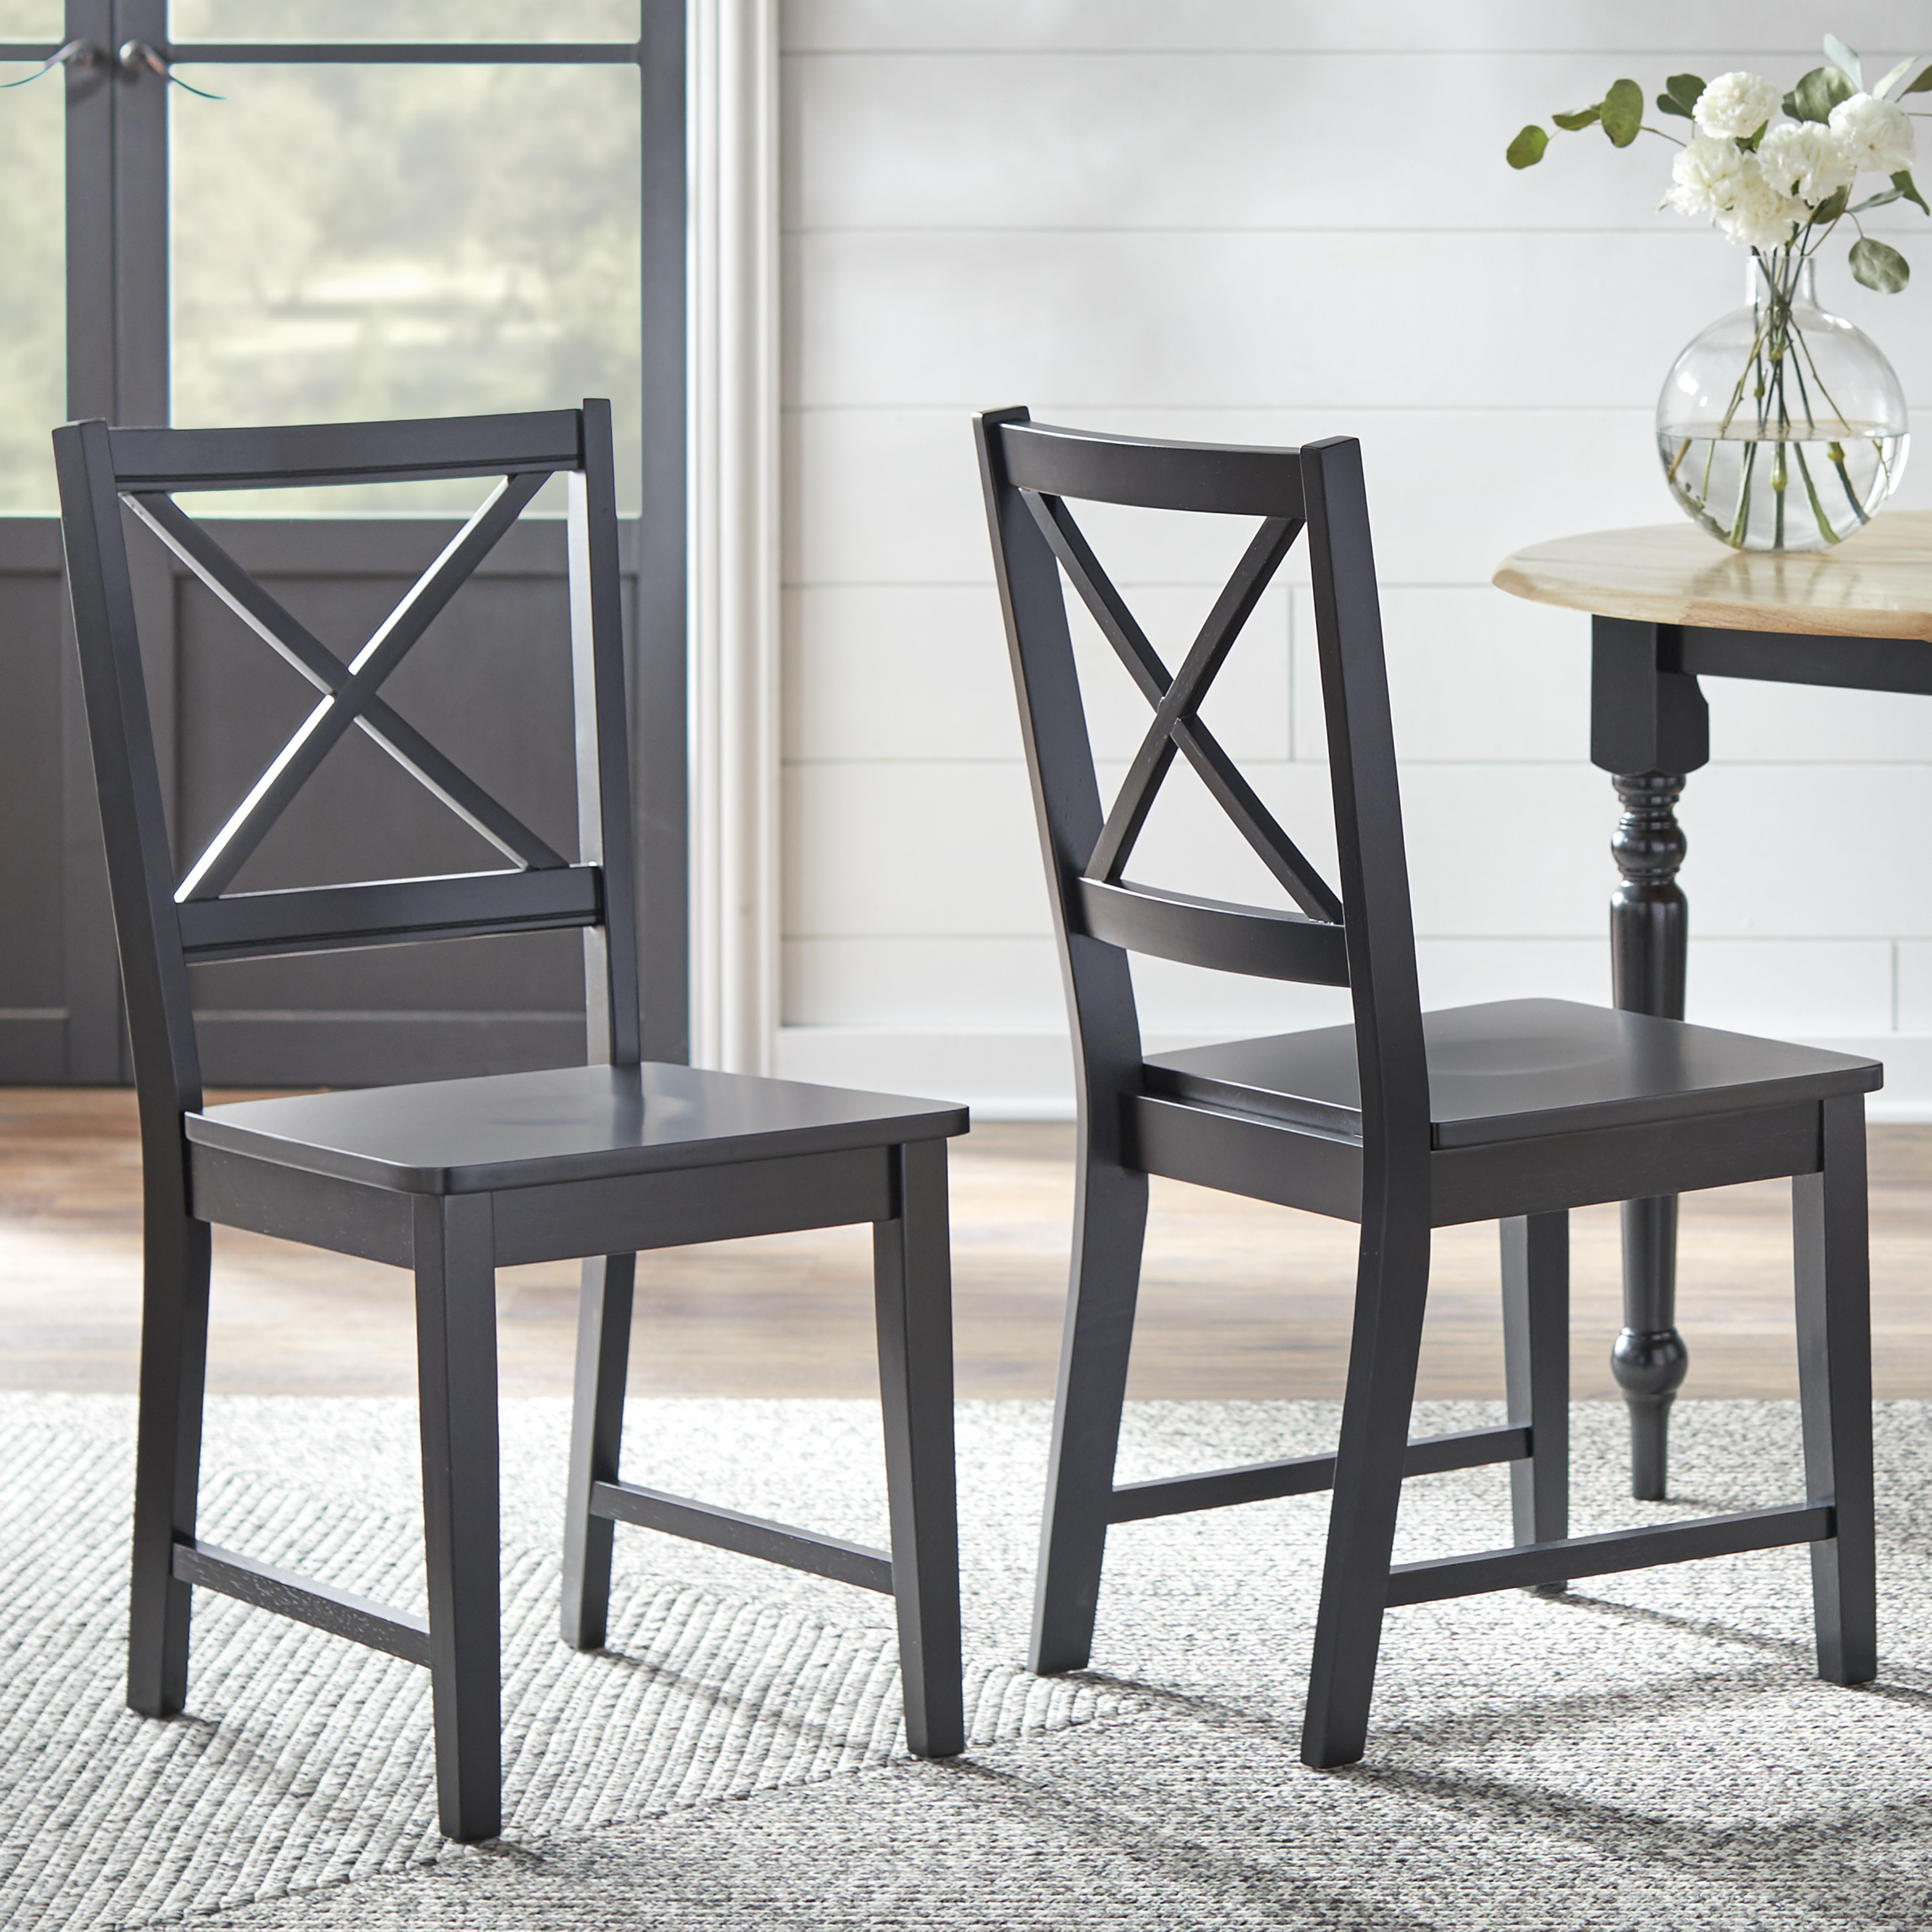 TMS Virgina Indoor Cross-Back Dining Chair, Set of 2, Black - image 1 of 6